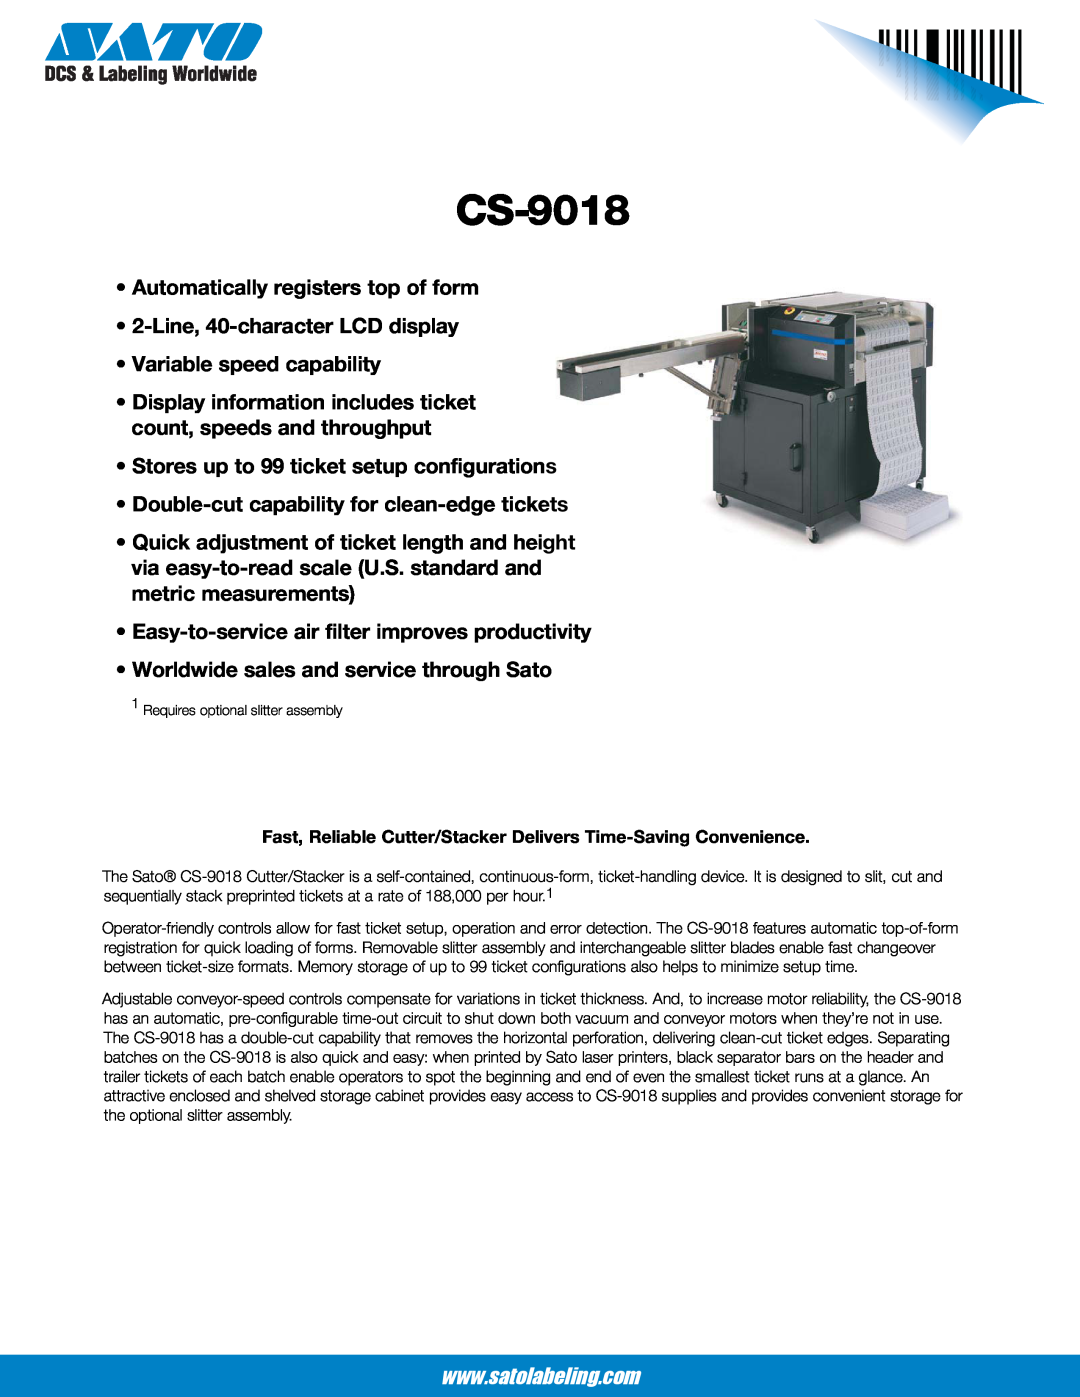 SATO CS-9018 manual Automatically registers top of form 2-Line, 40-character LCD display, Variable speed capability 